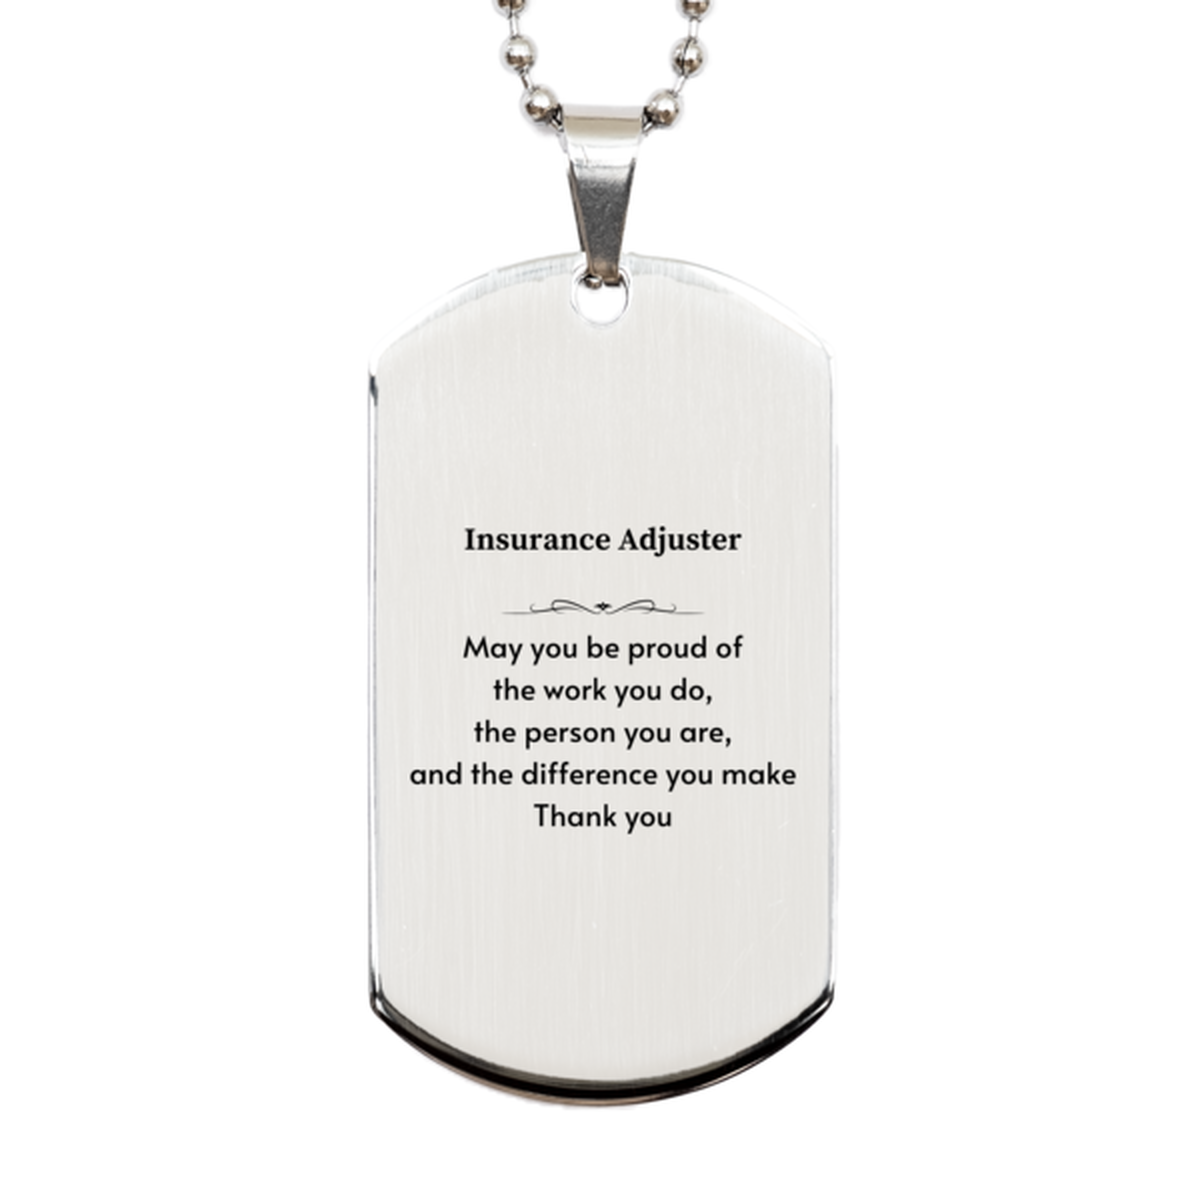 Heartwarming Silver Dog Tag Retirement Coworkers Gifts for Insurance Adjuster, Insurance Adjuster May You be proud of the work you do, the person you are Gifts for Boss Men Women Friends